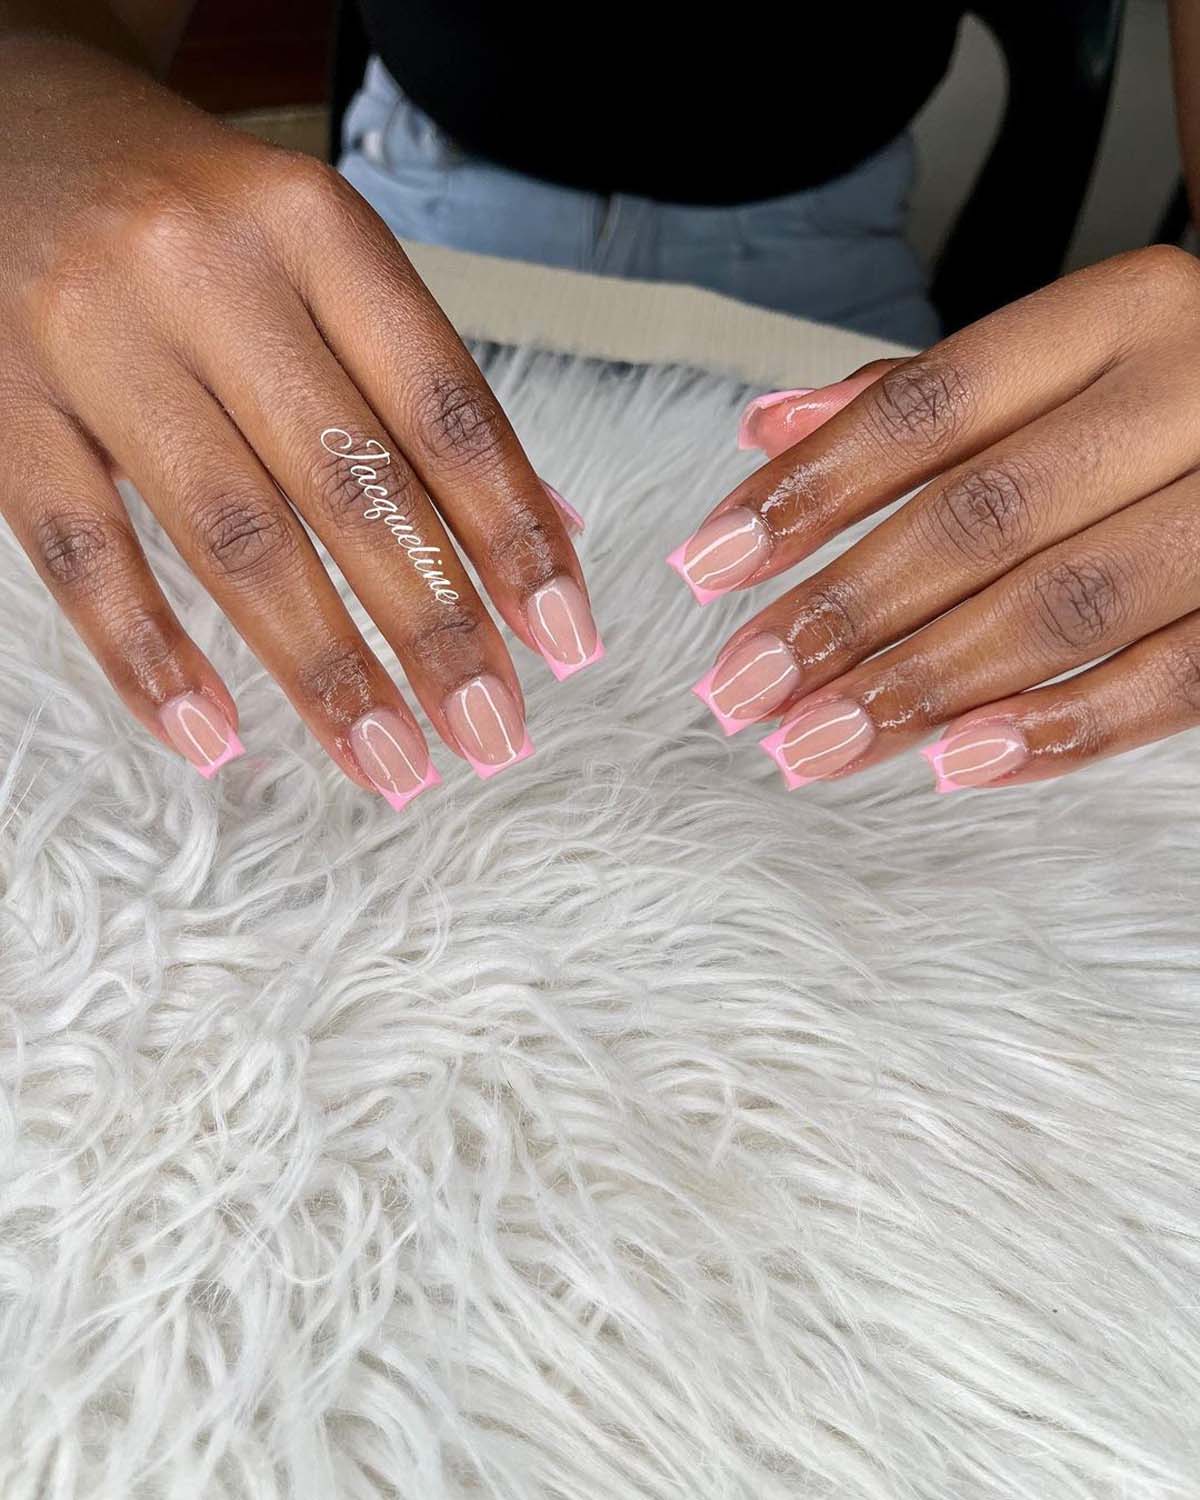 24 Chic and Simple Short Nail Designs for a Polished Look